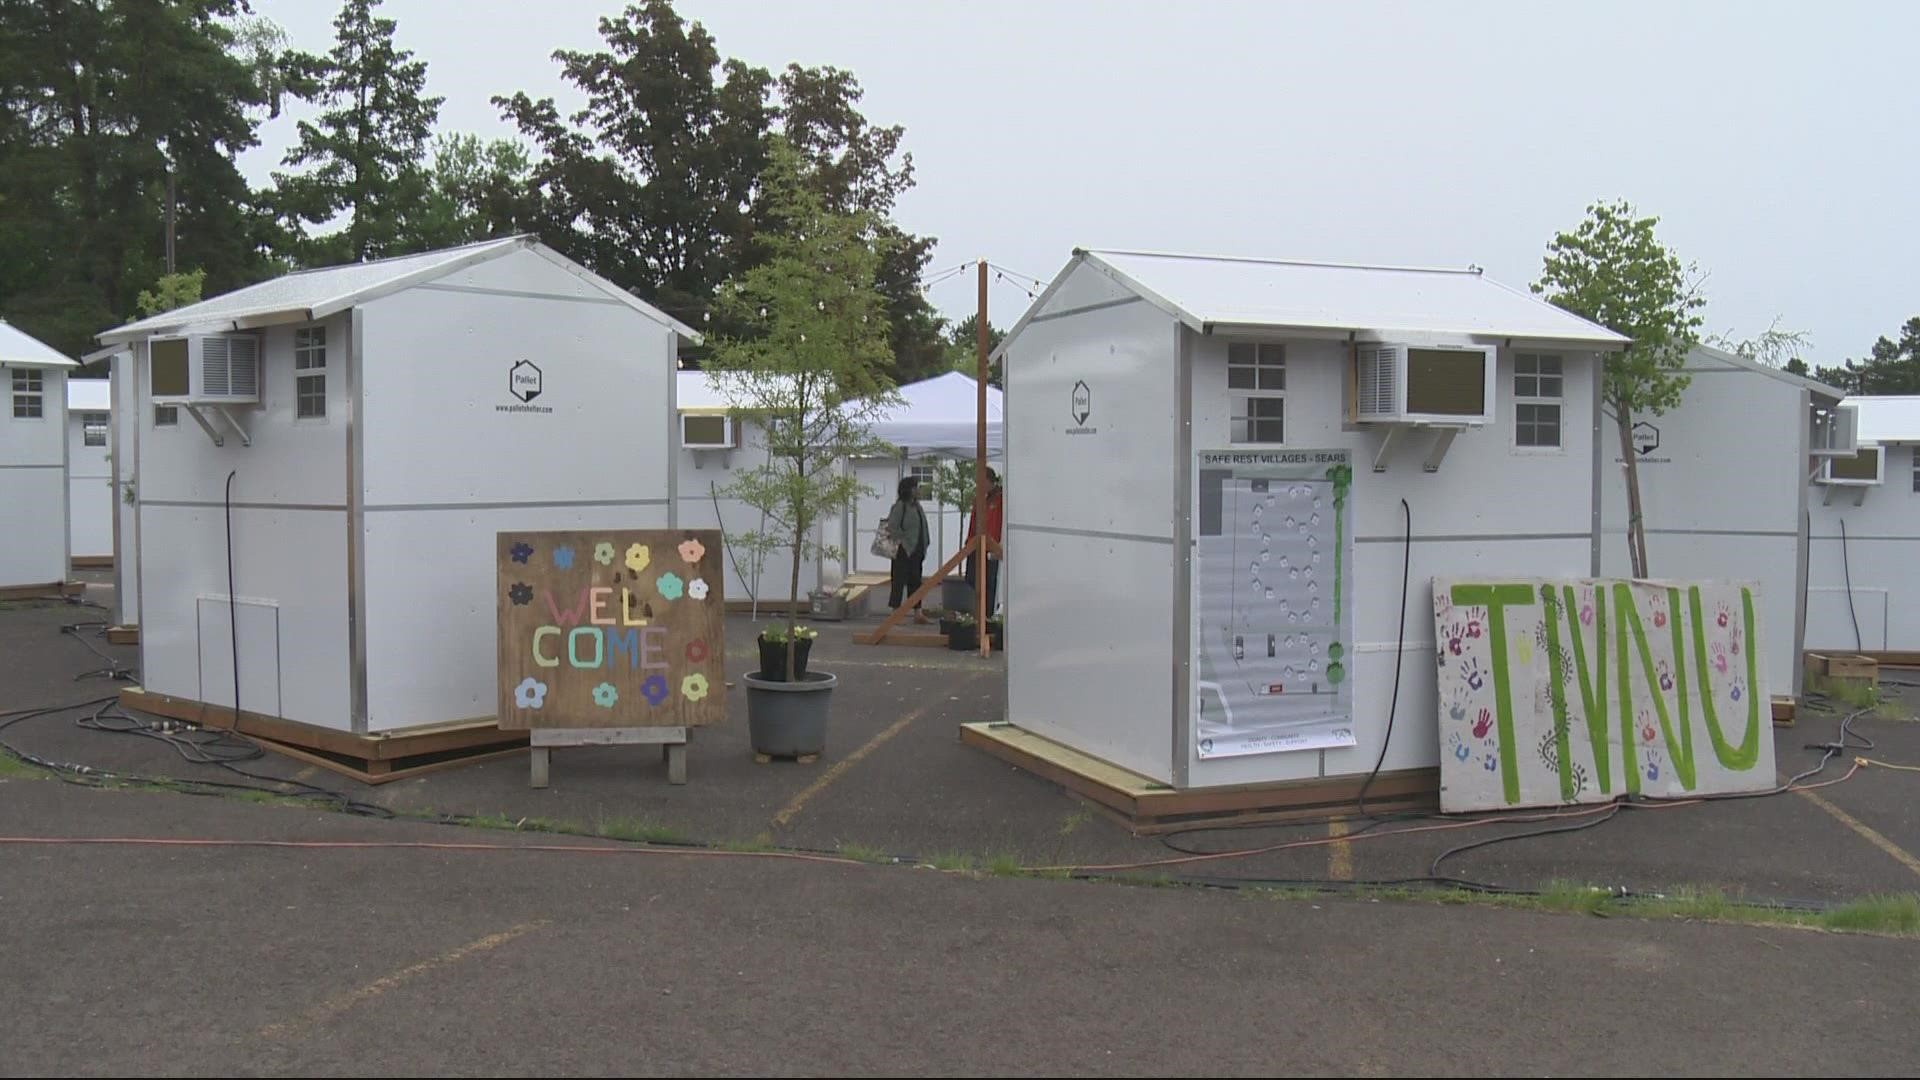 The village opens the same month a temporary outdoor homeless shelter in Old Town closed. Villagers are scheduled to move in at the end of next week.